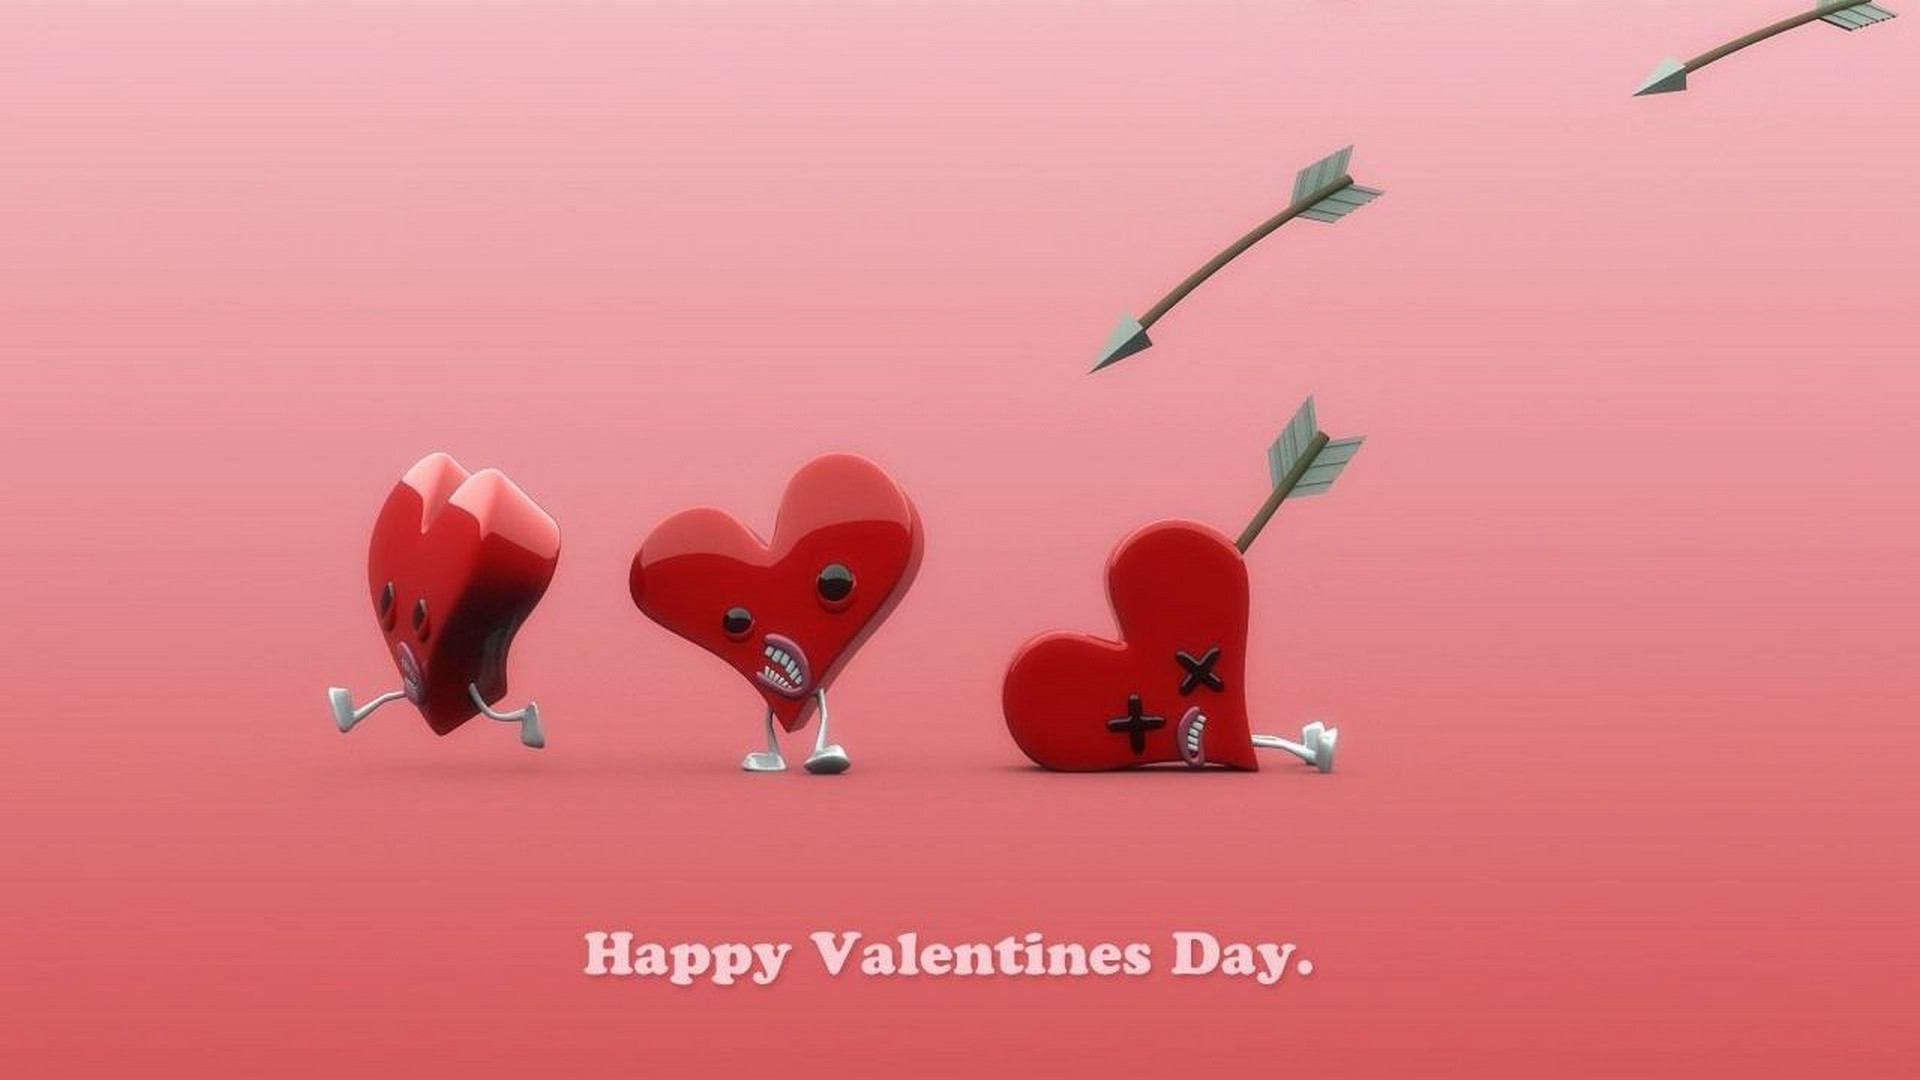 Animated Valentines Day Wallpaper 1920x1080